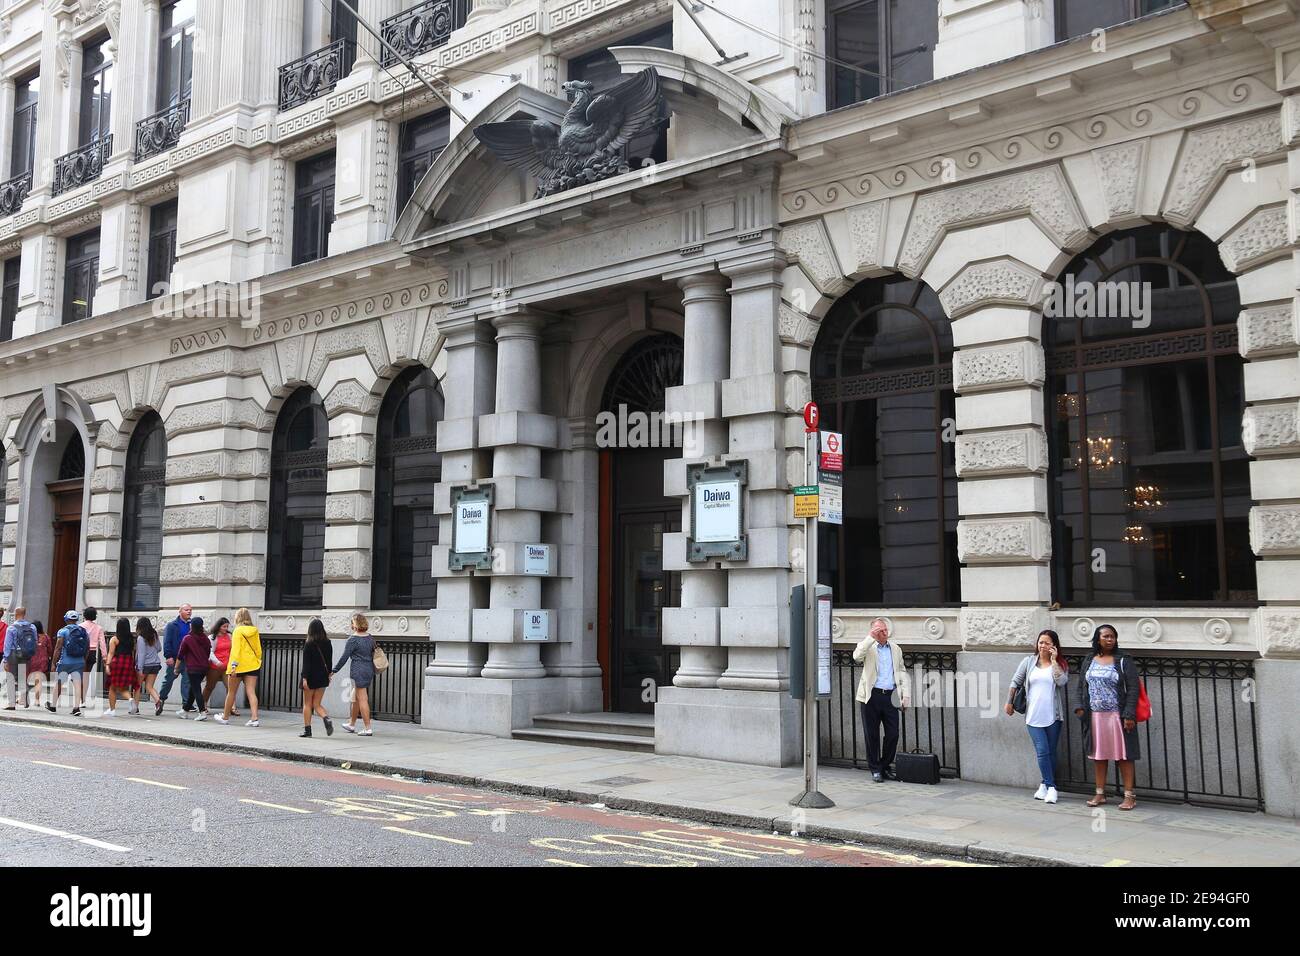 LONDON, UK - JULY 8, 2016: People walk by Daiwa Capital Markets office in  the City of London. Daiwa Securities Group is large Japanese investment bank  Stock Photo - Alamy